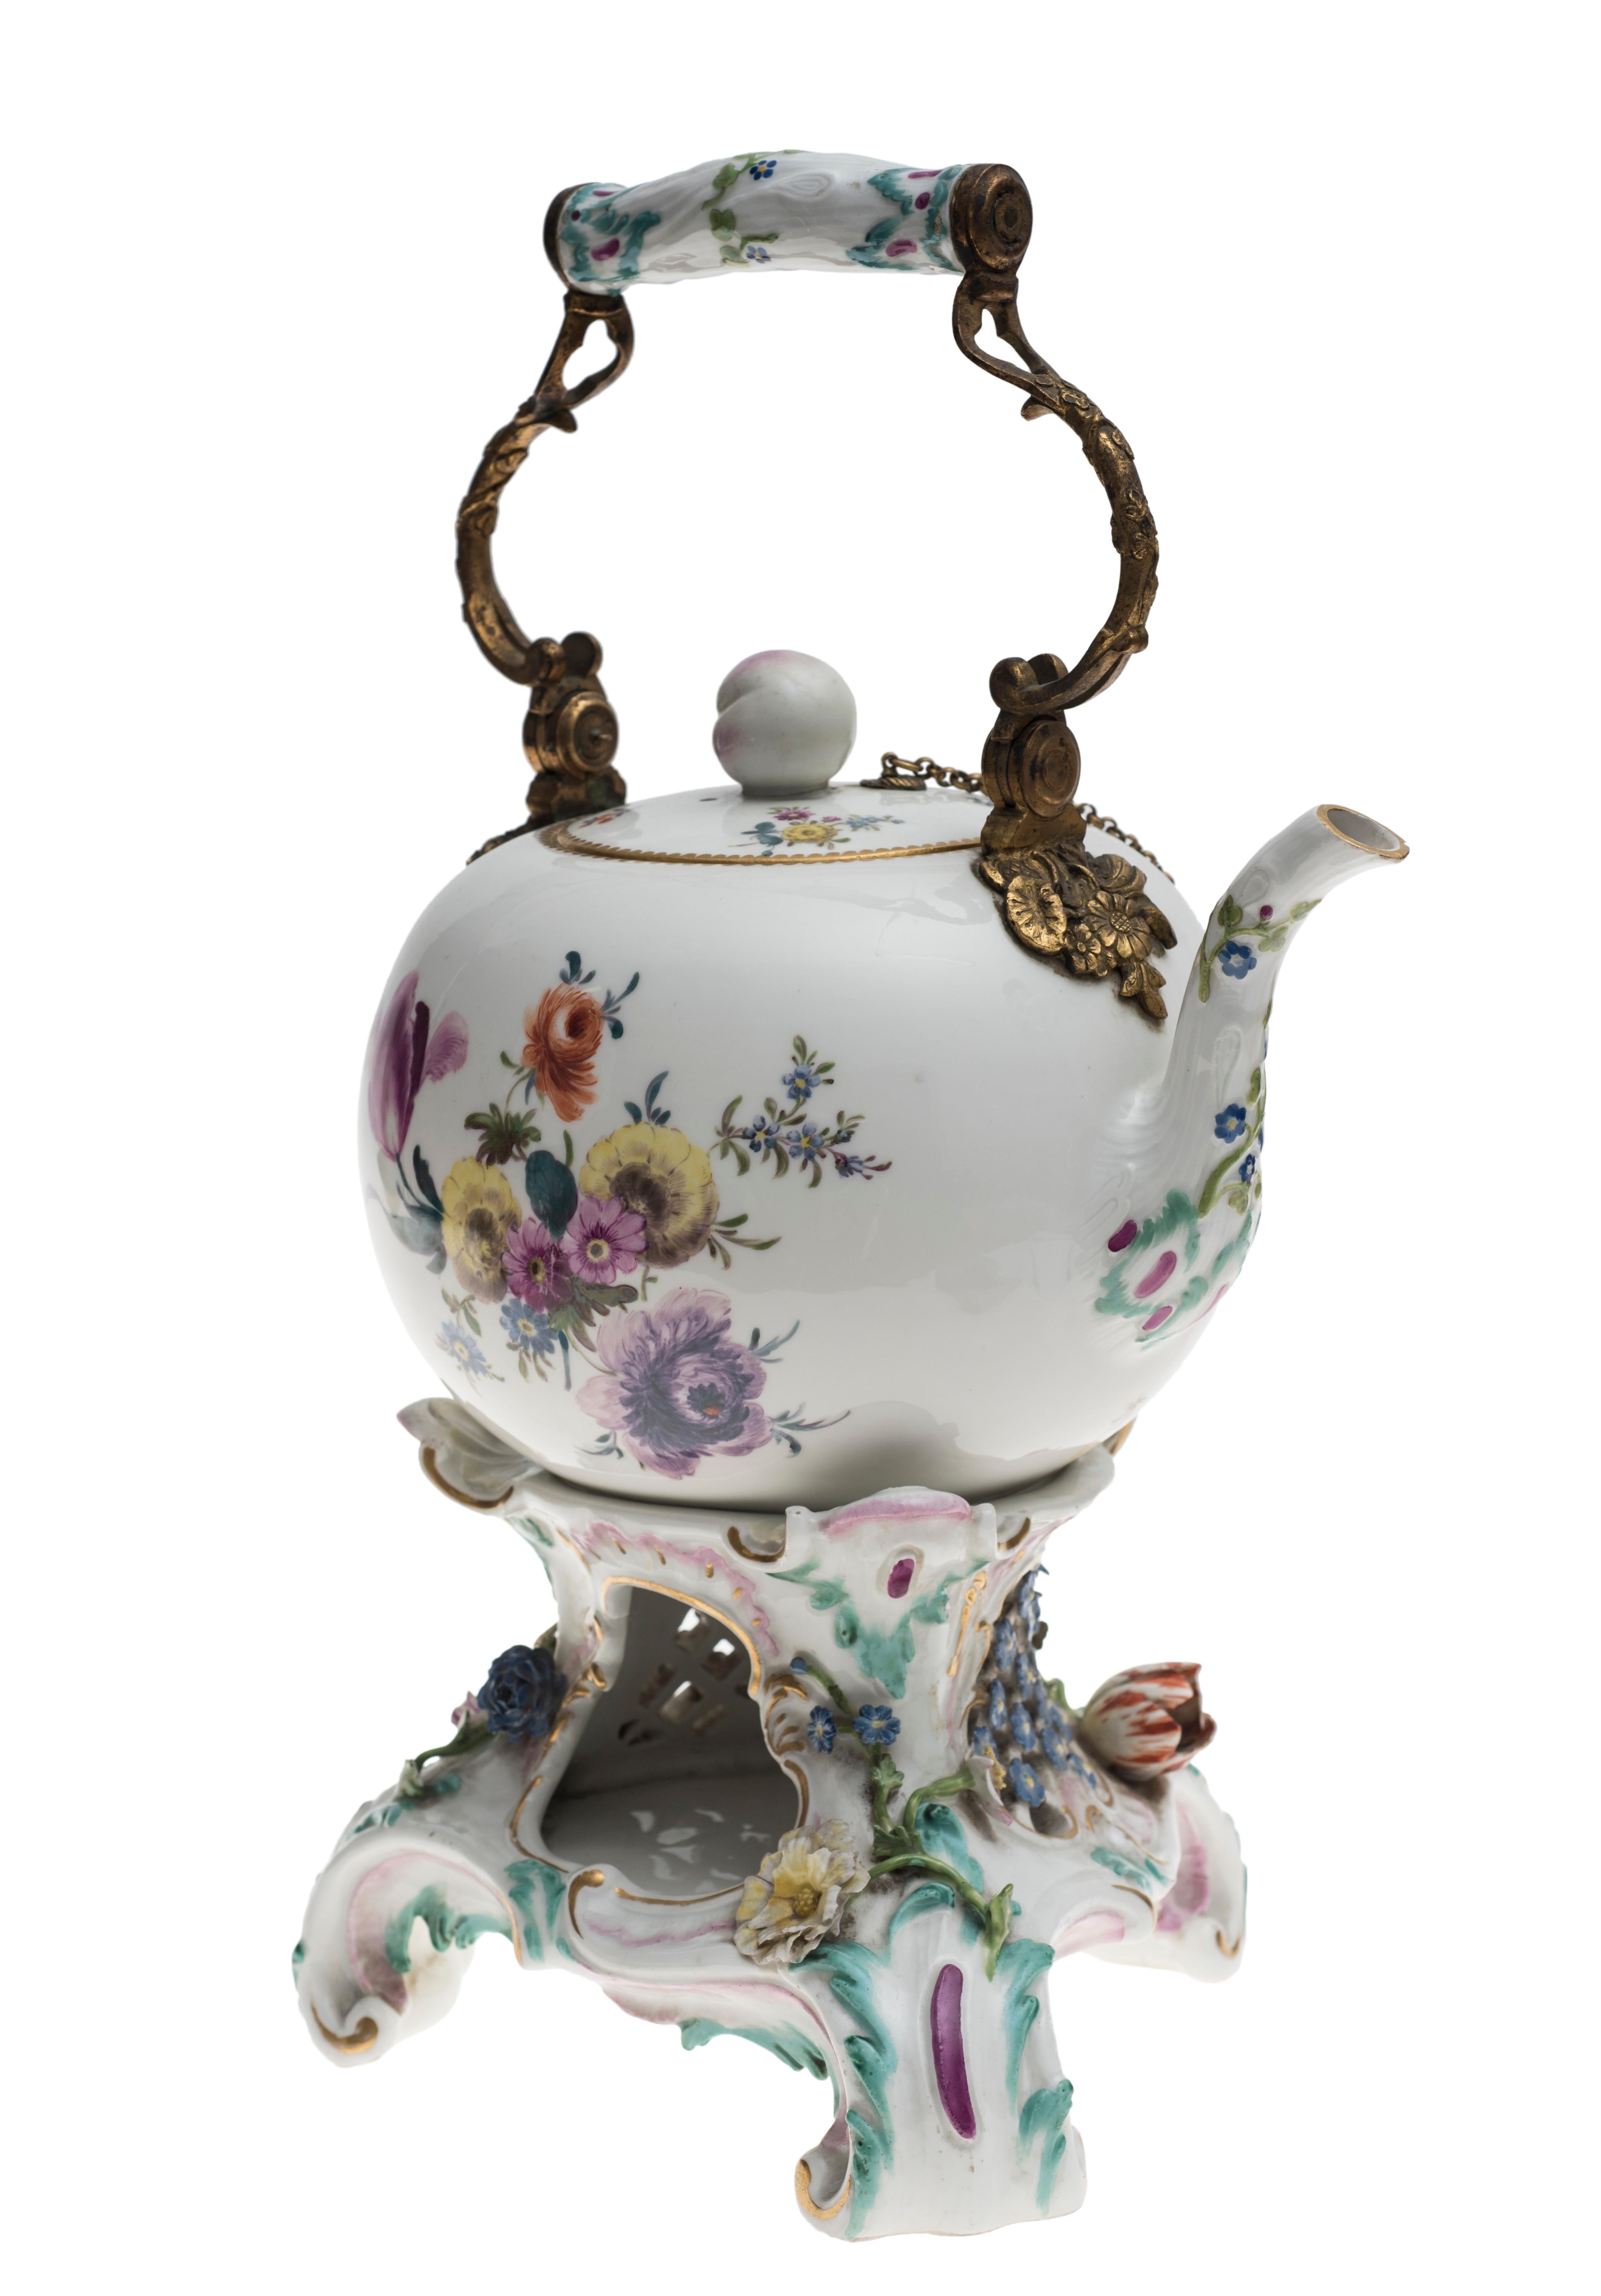 Porcelain samovar is an original decorative object realized in the last quarter of the 19th century. 

Porcelain painted with the subject of flowers, with relief on the base. Gilded bronze handle. This beautiful samovar was a container traditionally